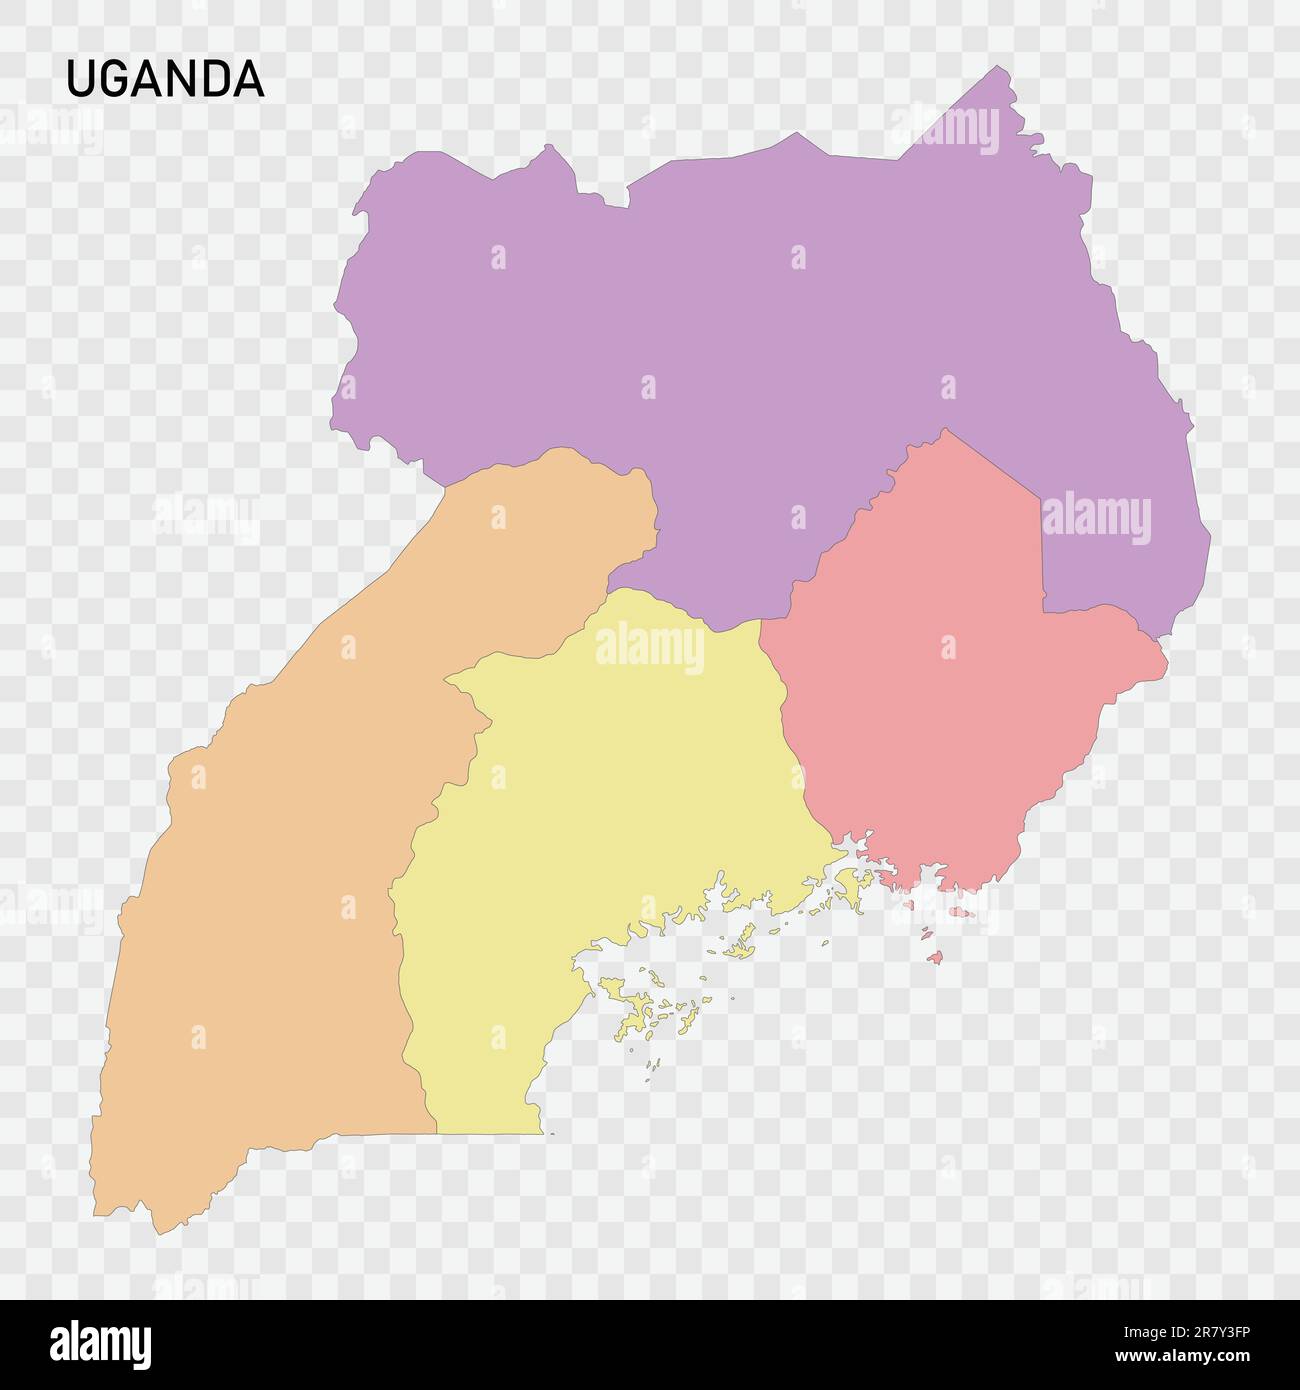 Isolated colored map of Uganda with borders of the regions Stock Vector